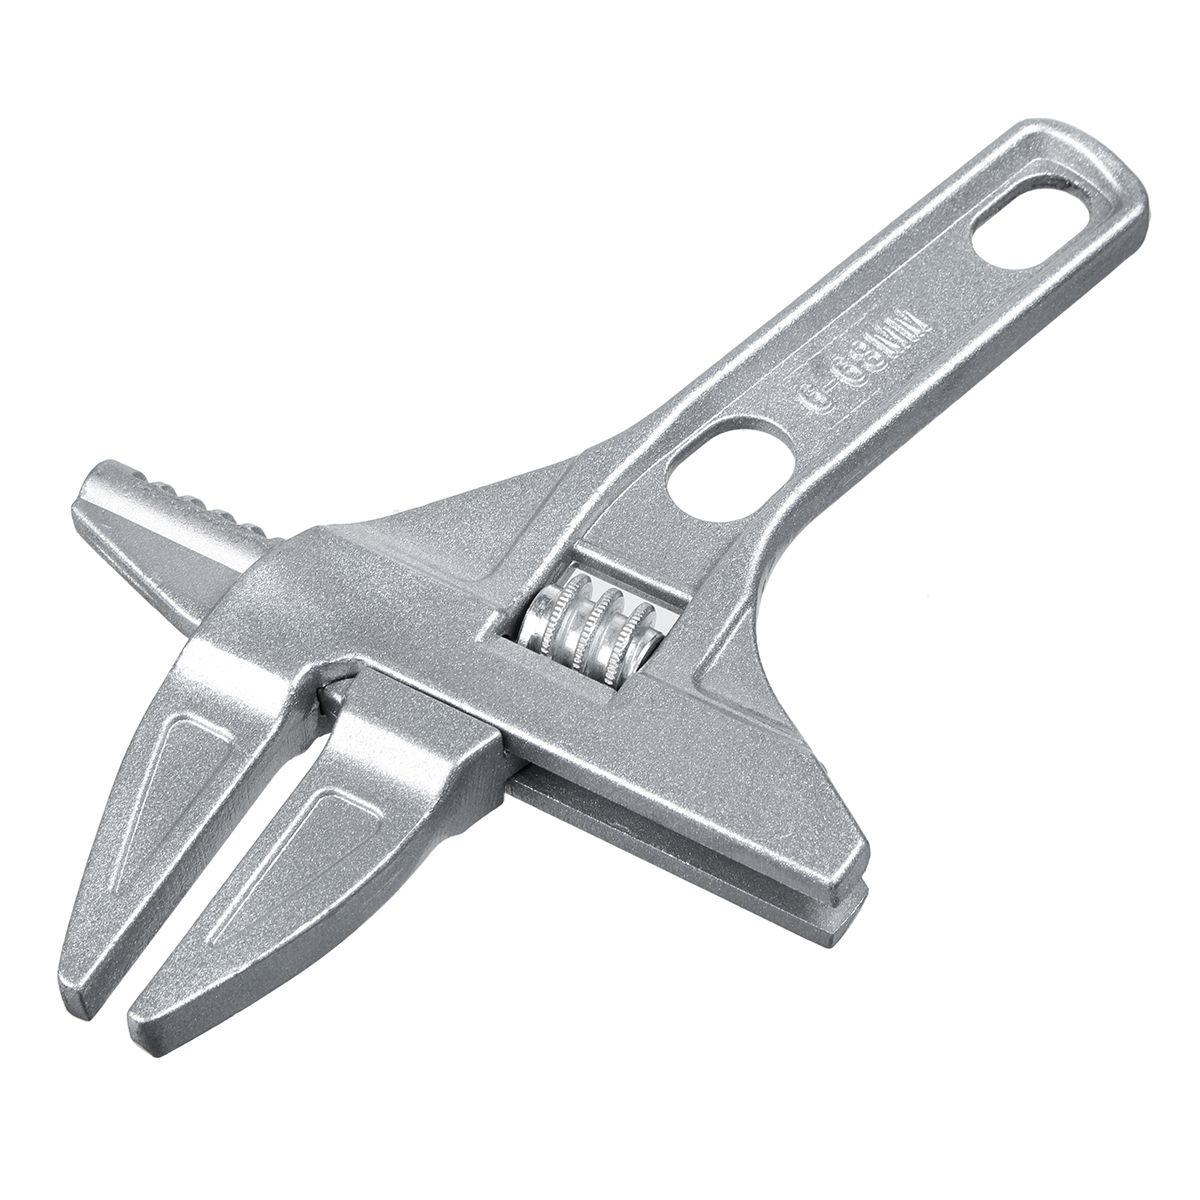 Adjustable-Spanner-16-68mm-Big-Opening-Spanner-Wrench-Mini-Nut-Key-Hand-Tools-Metal-Universal-Spanne-1625089